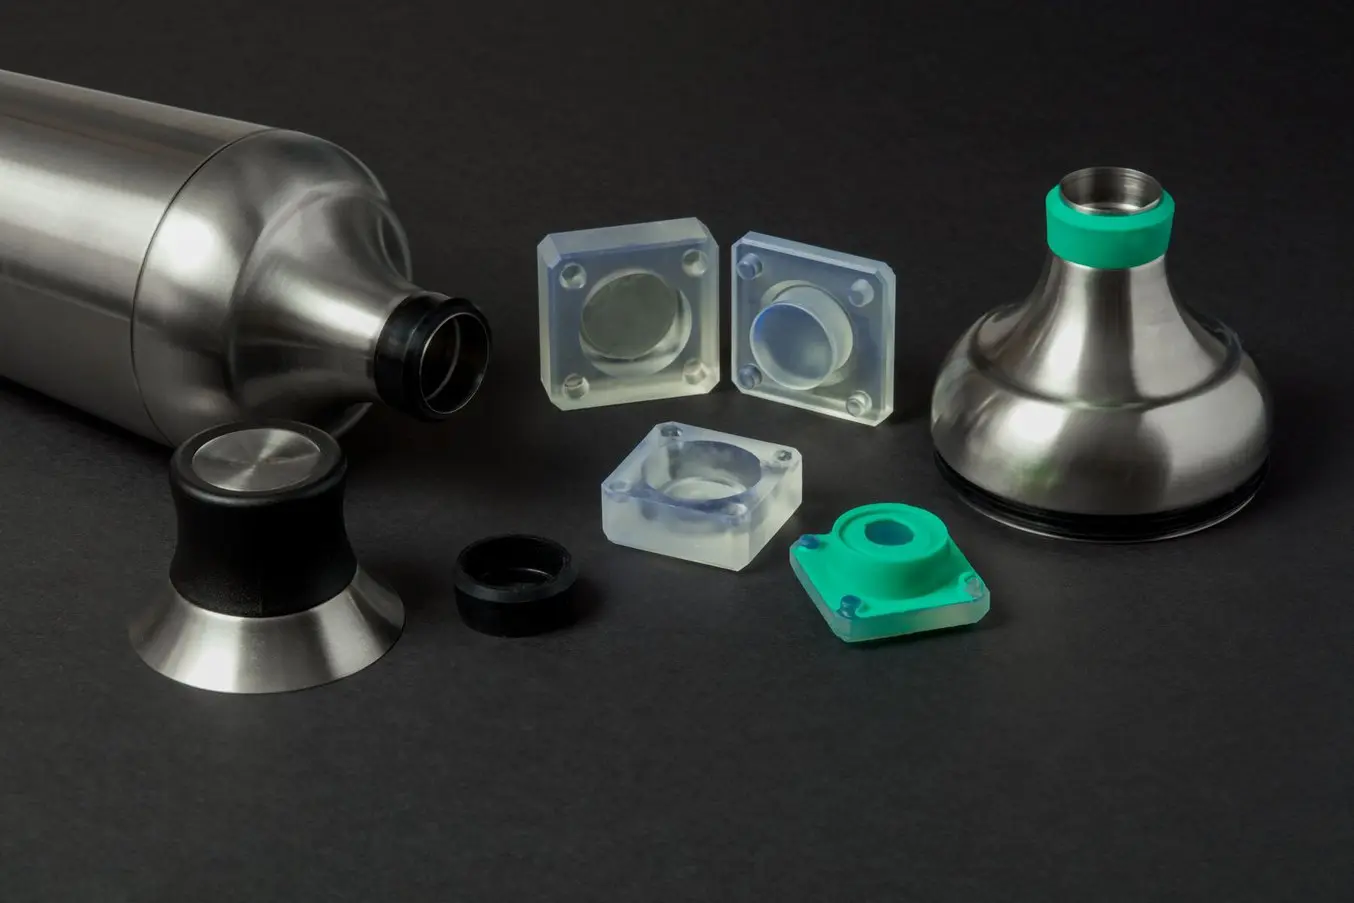 OXO uses compression molding for prototyping soft components such as watertight gaskets.